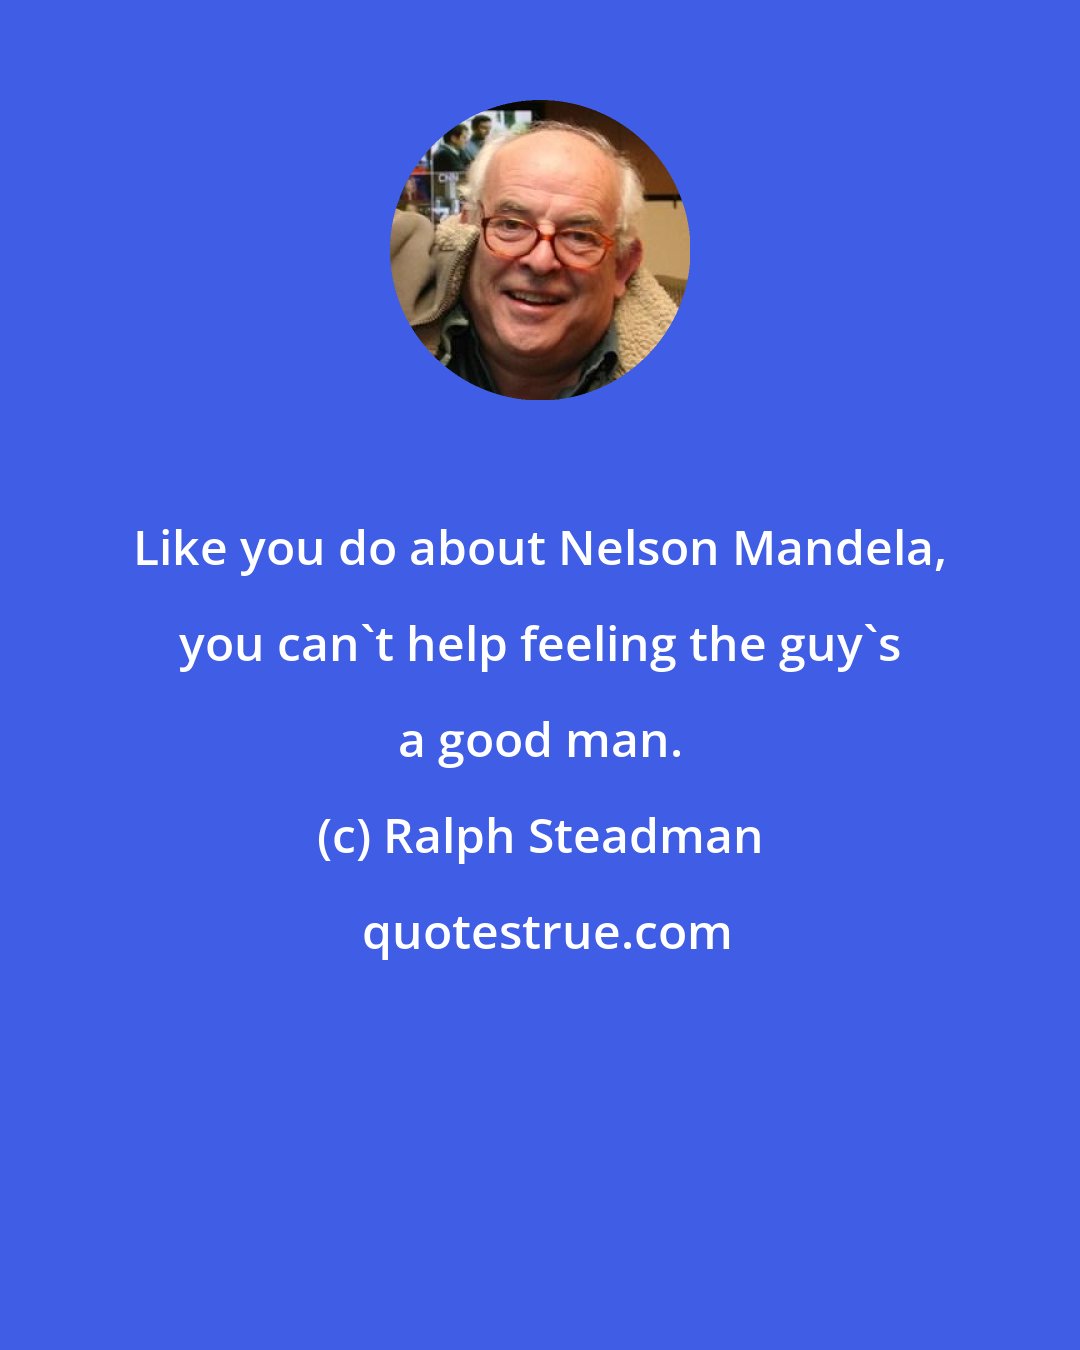 Ralph Steadman: Like you do about Nelson Mandela, you can't help feeling the guy's a good man.